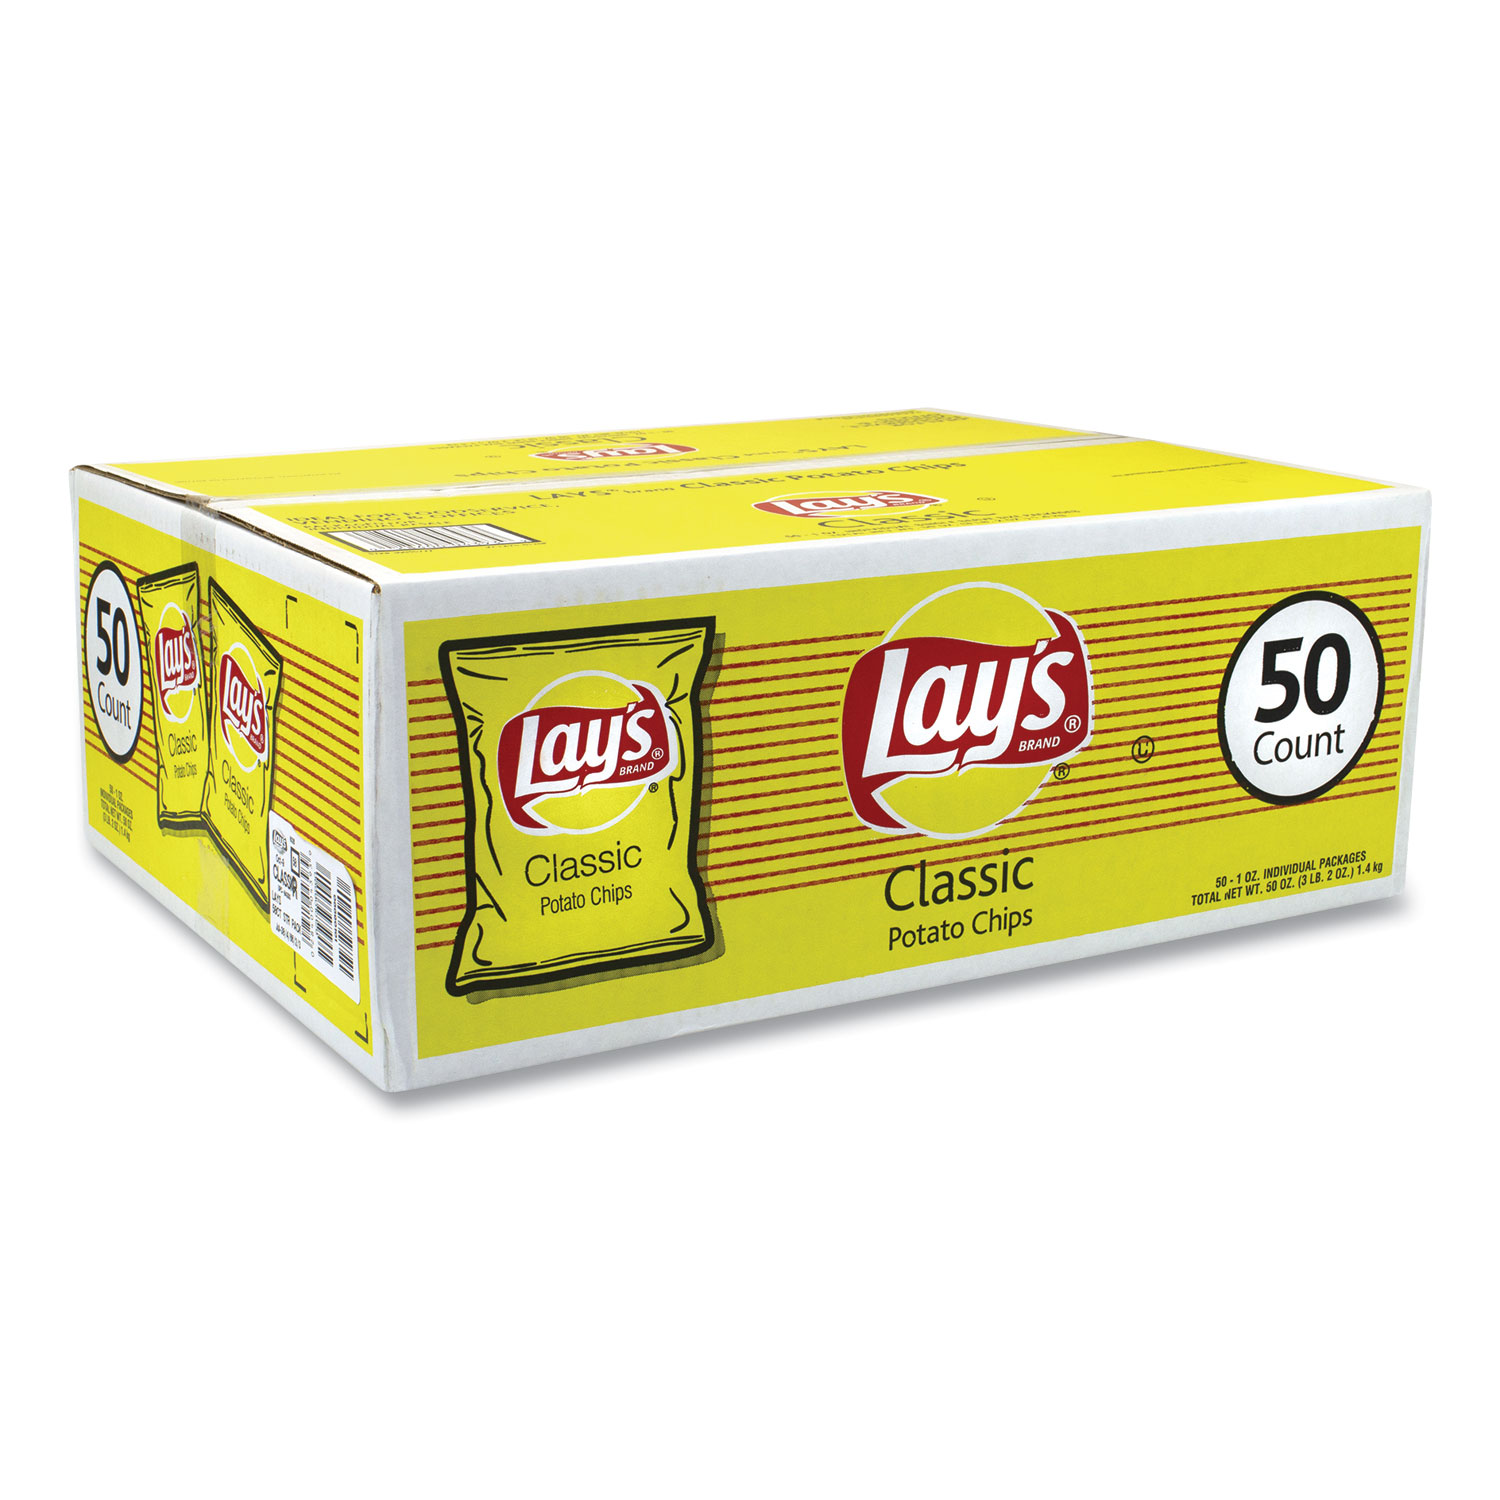 Lays® Regular Potato Chips, 1 oz Bag, 50/Carton, Free Delivery in 1-4 Business Days